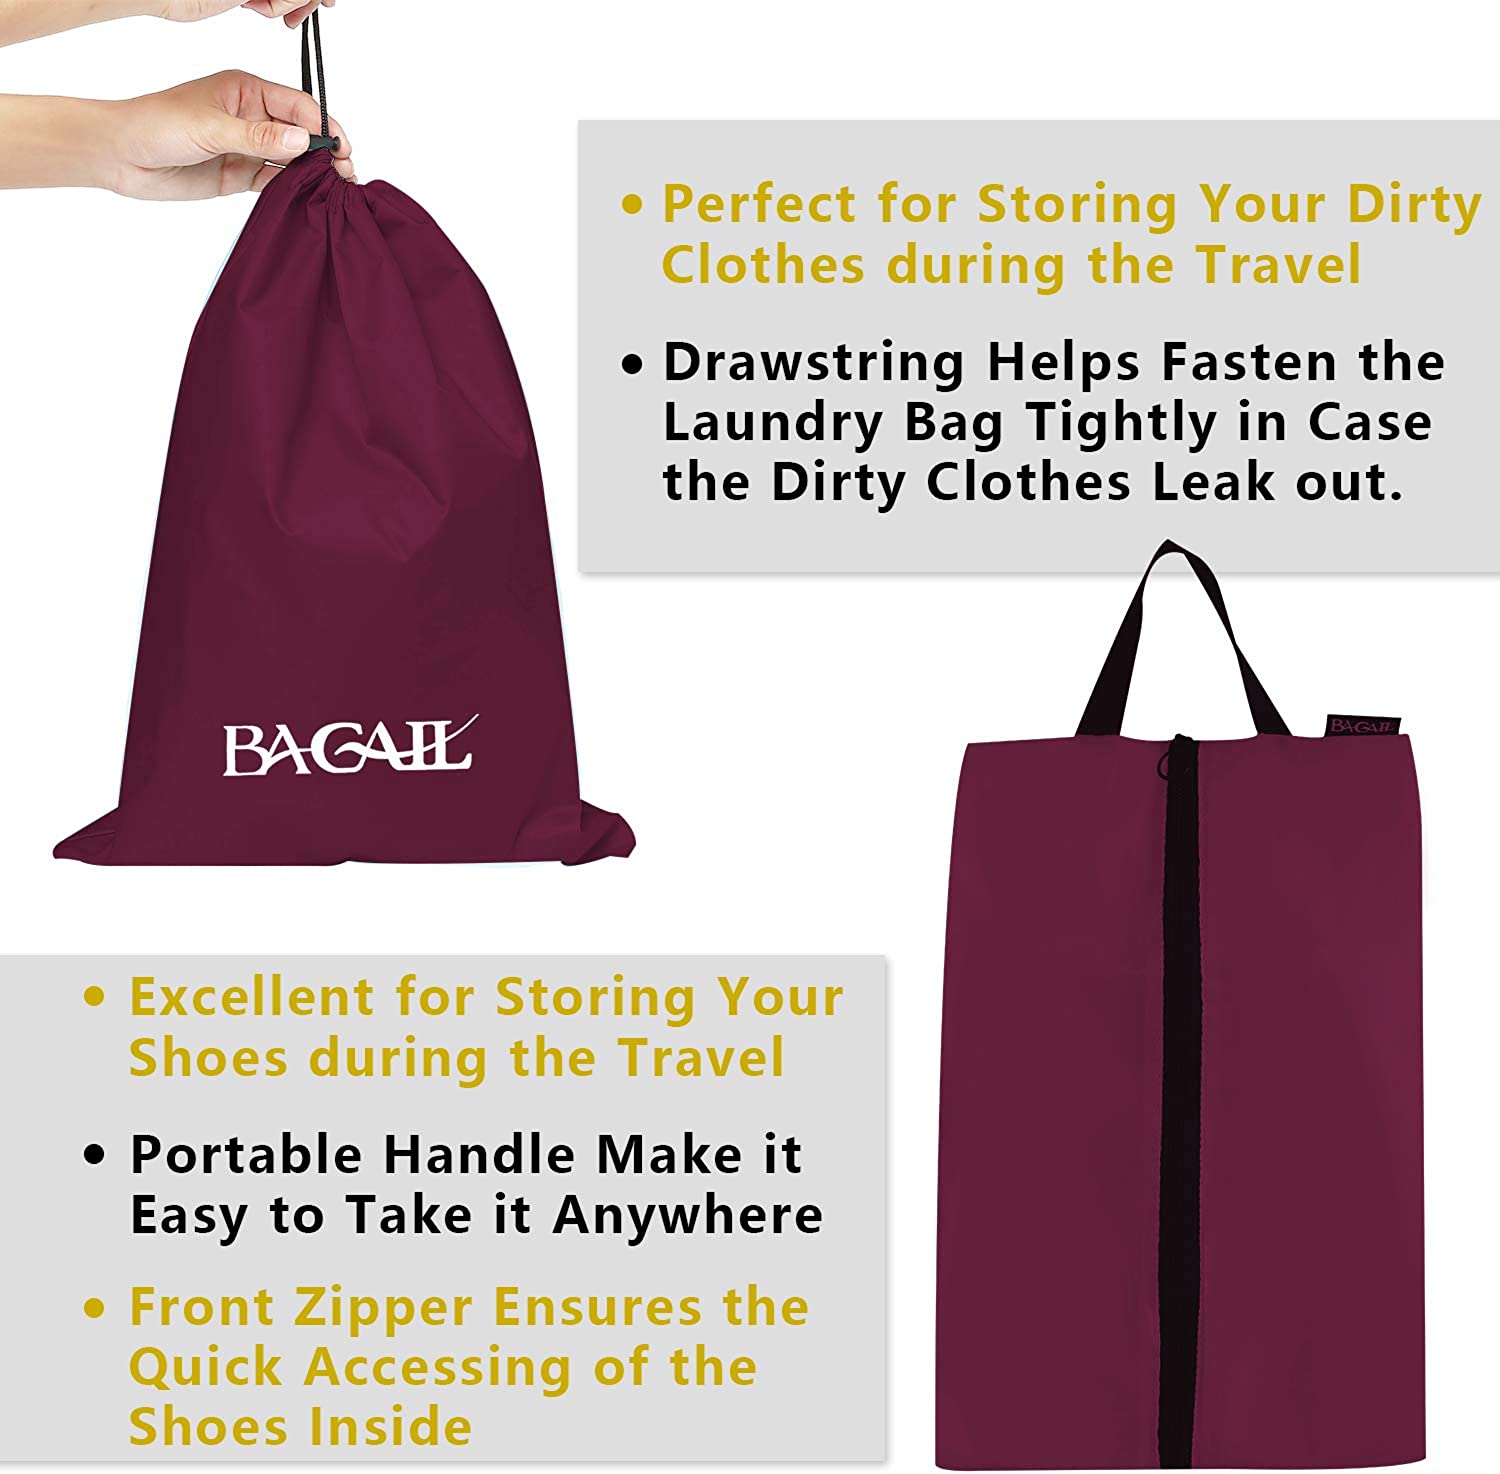  BAGAIL 8 Set Packing Cubes Luggage Packing Organizers & Digital  Luggage Scale with Temperature Function